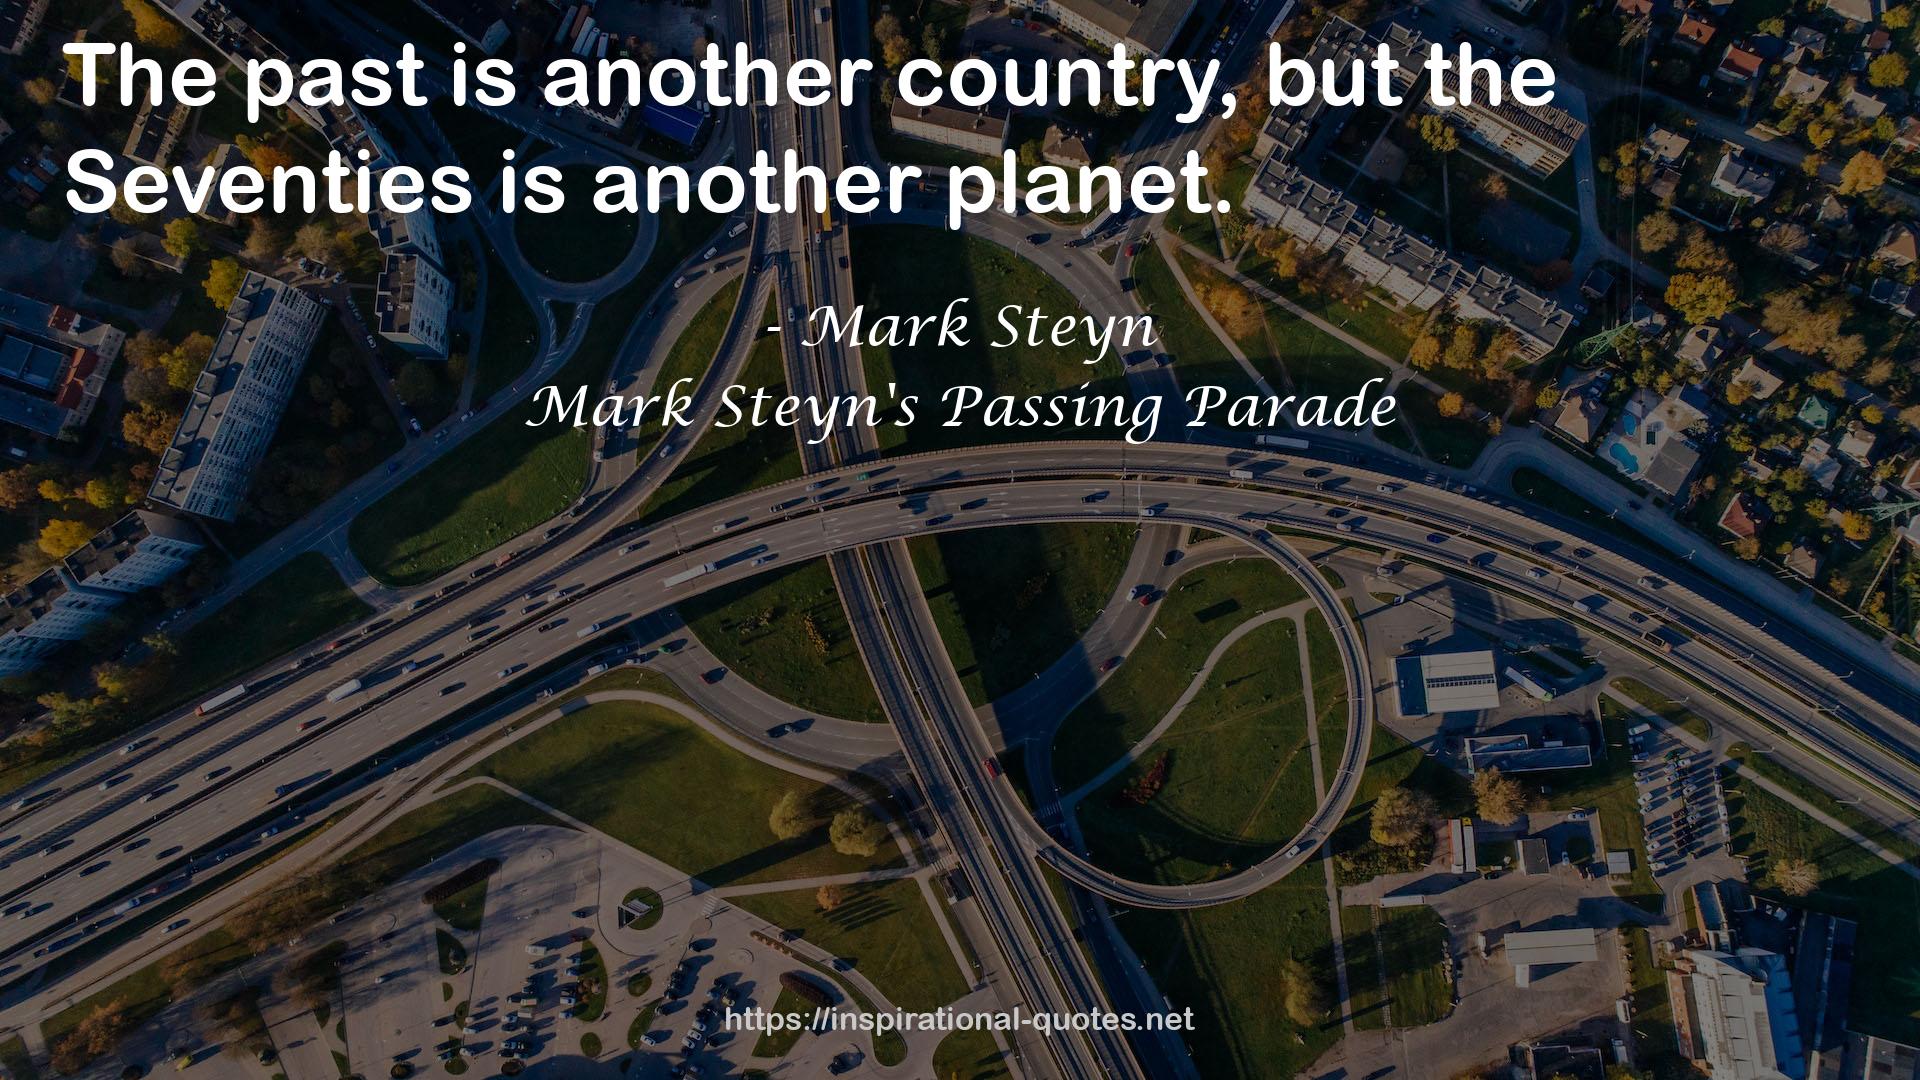 Mark Steyn's Passing Parade QUOTES